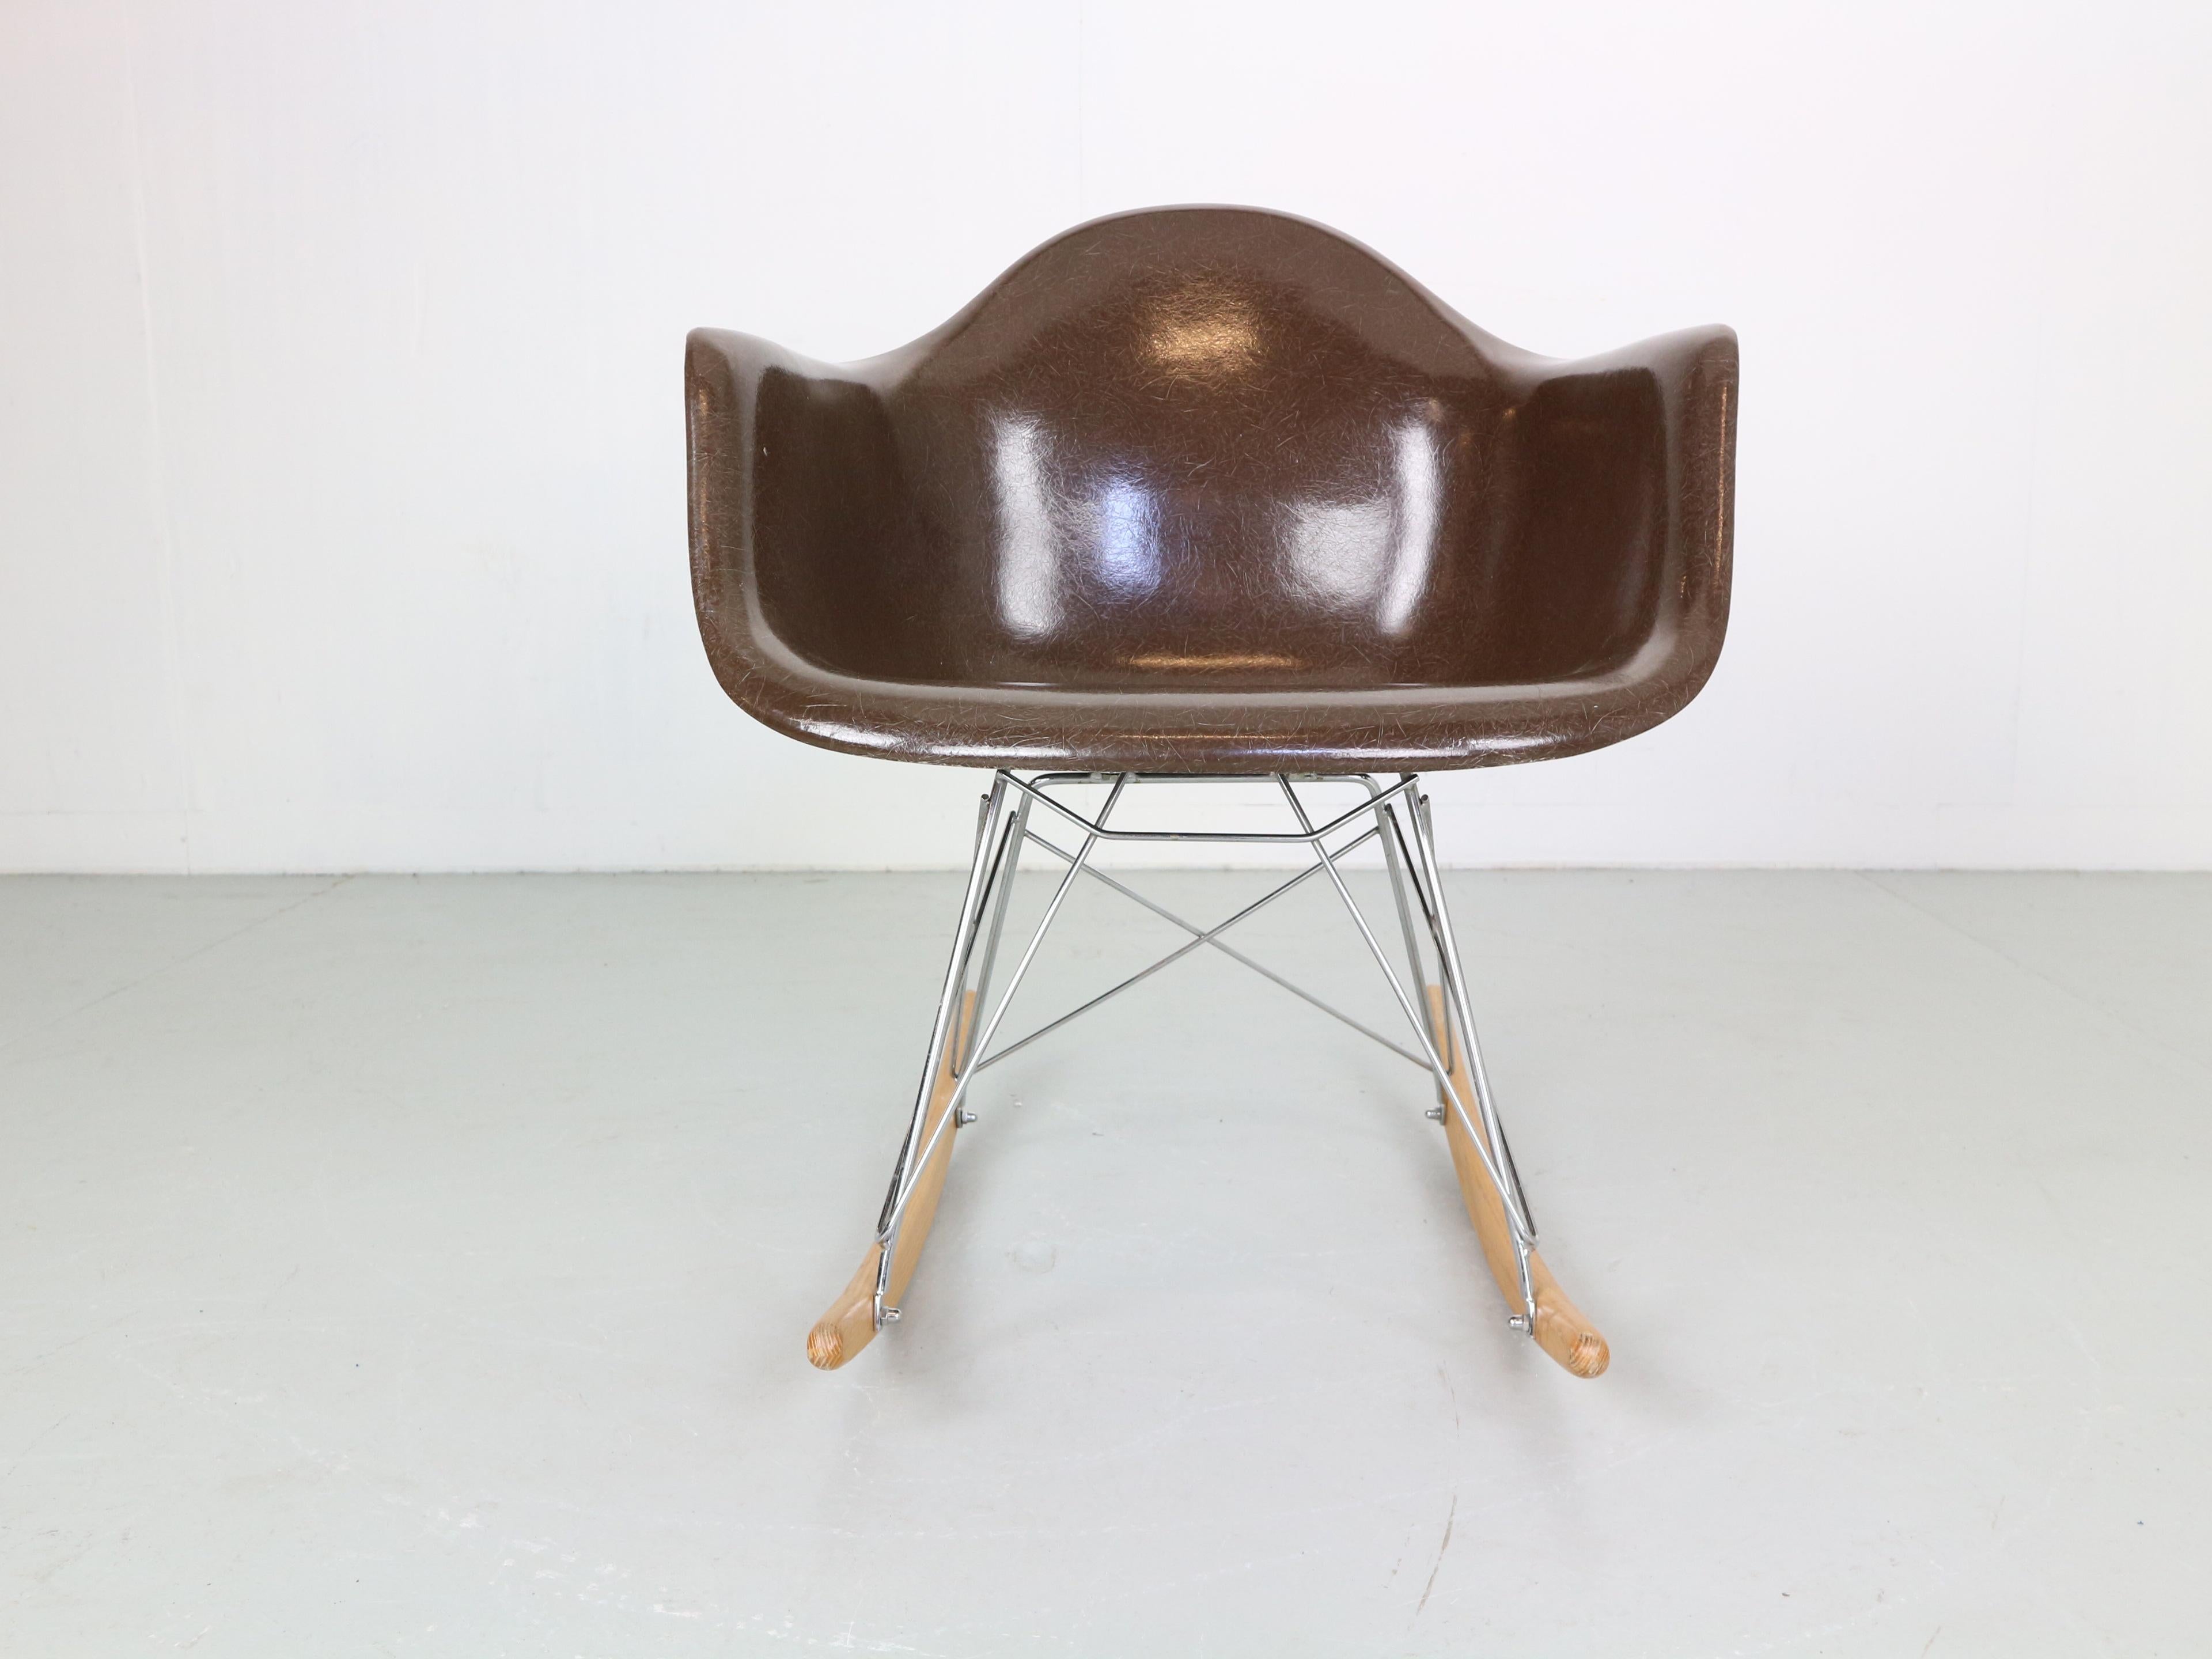 Mid-Century Modern molded RAR rocking chair designed by Charles and Ray Eames for Herman Miller. 
This gorgeous midcentury rocking chair was produced 1977. 

An original condition.
Brown colour fibreglass moulded bucket formed tub chair with